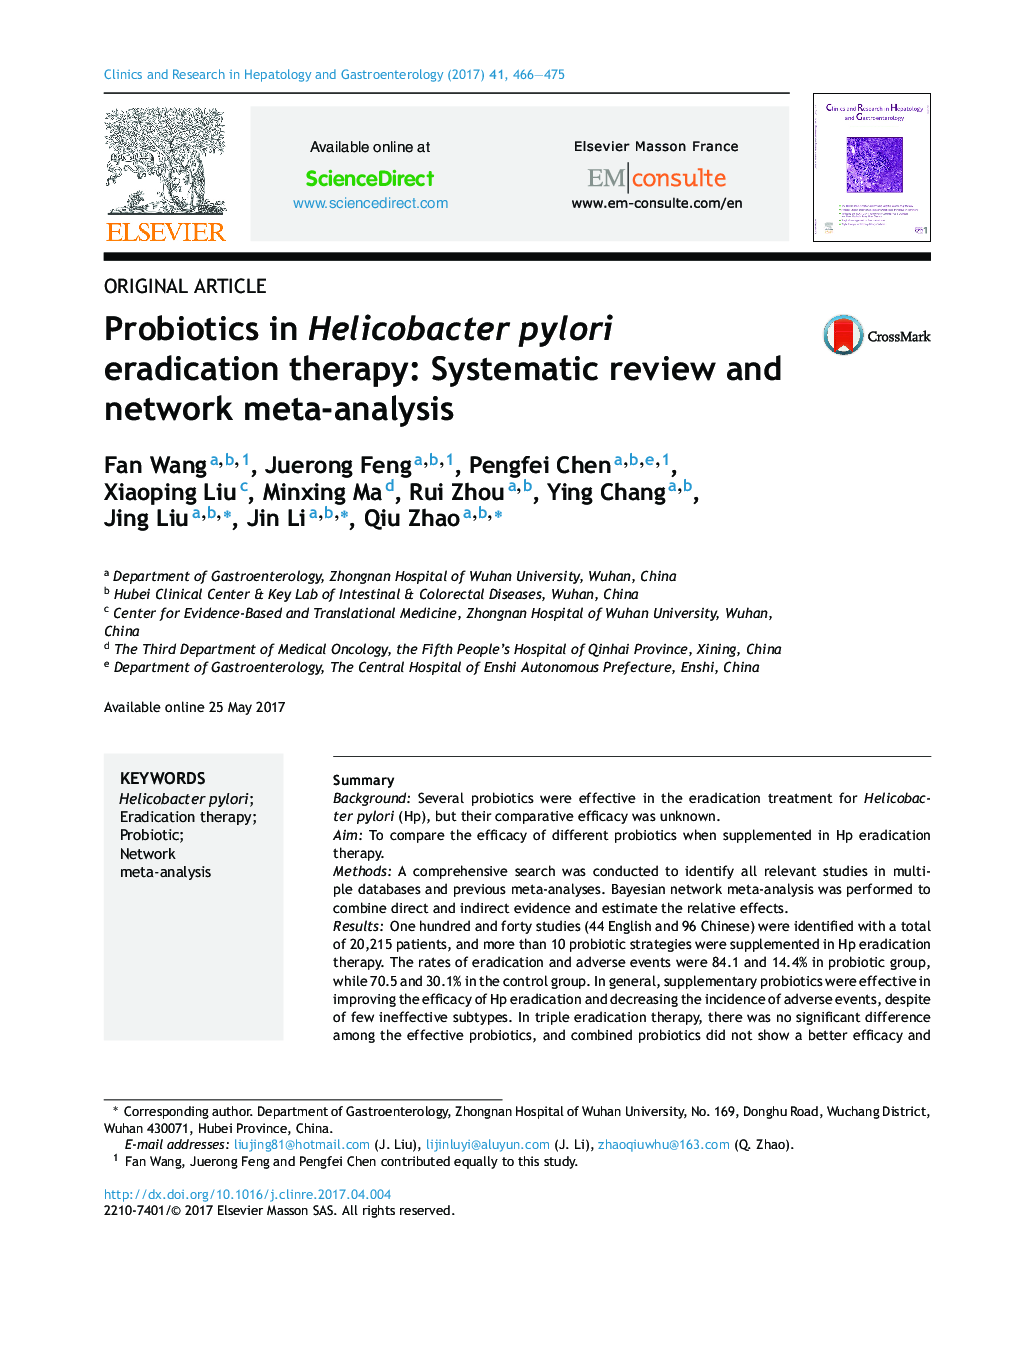 Probiotics in HelicobacterÂ pylori eradication therapy: Systematic review and network meta-analysis